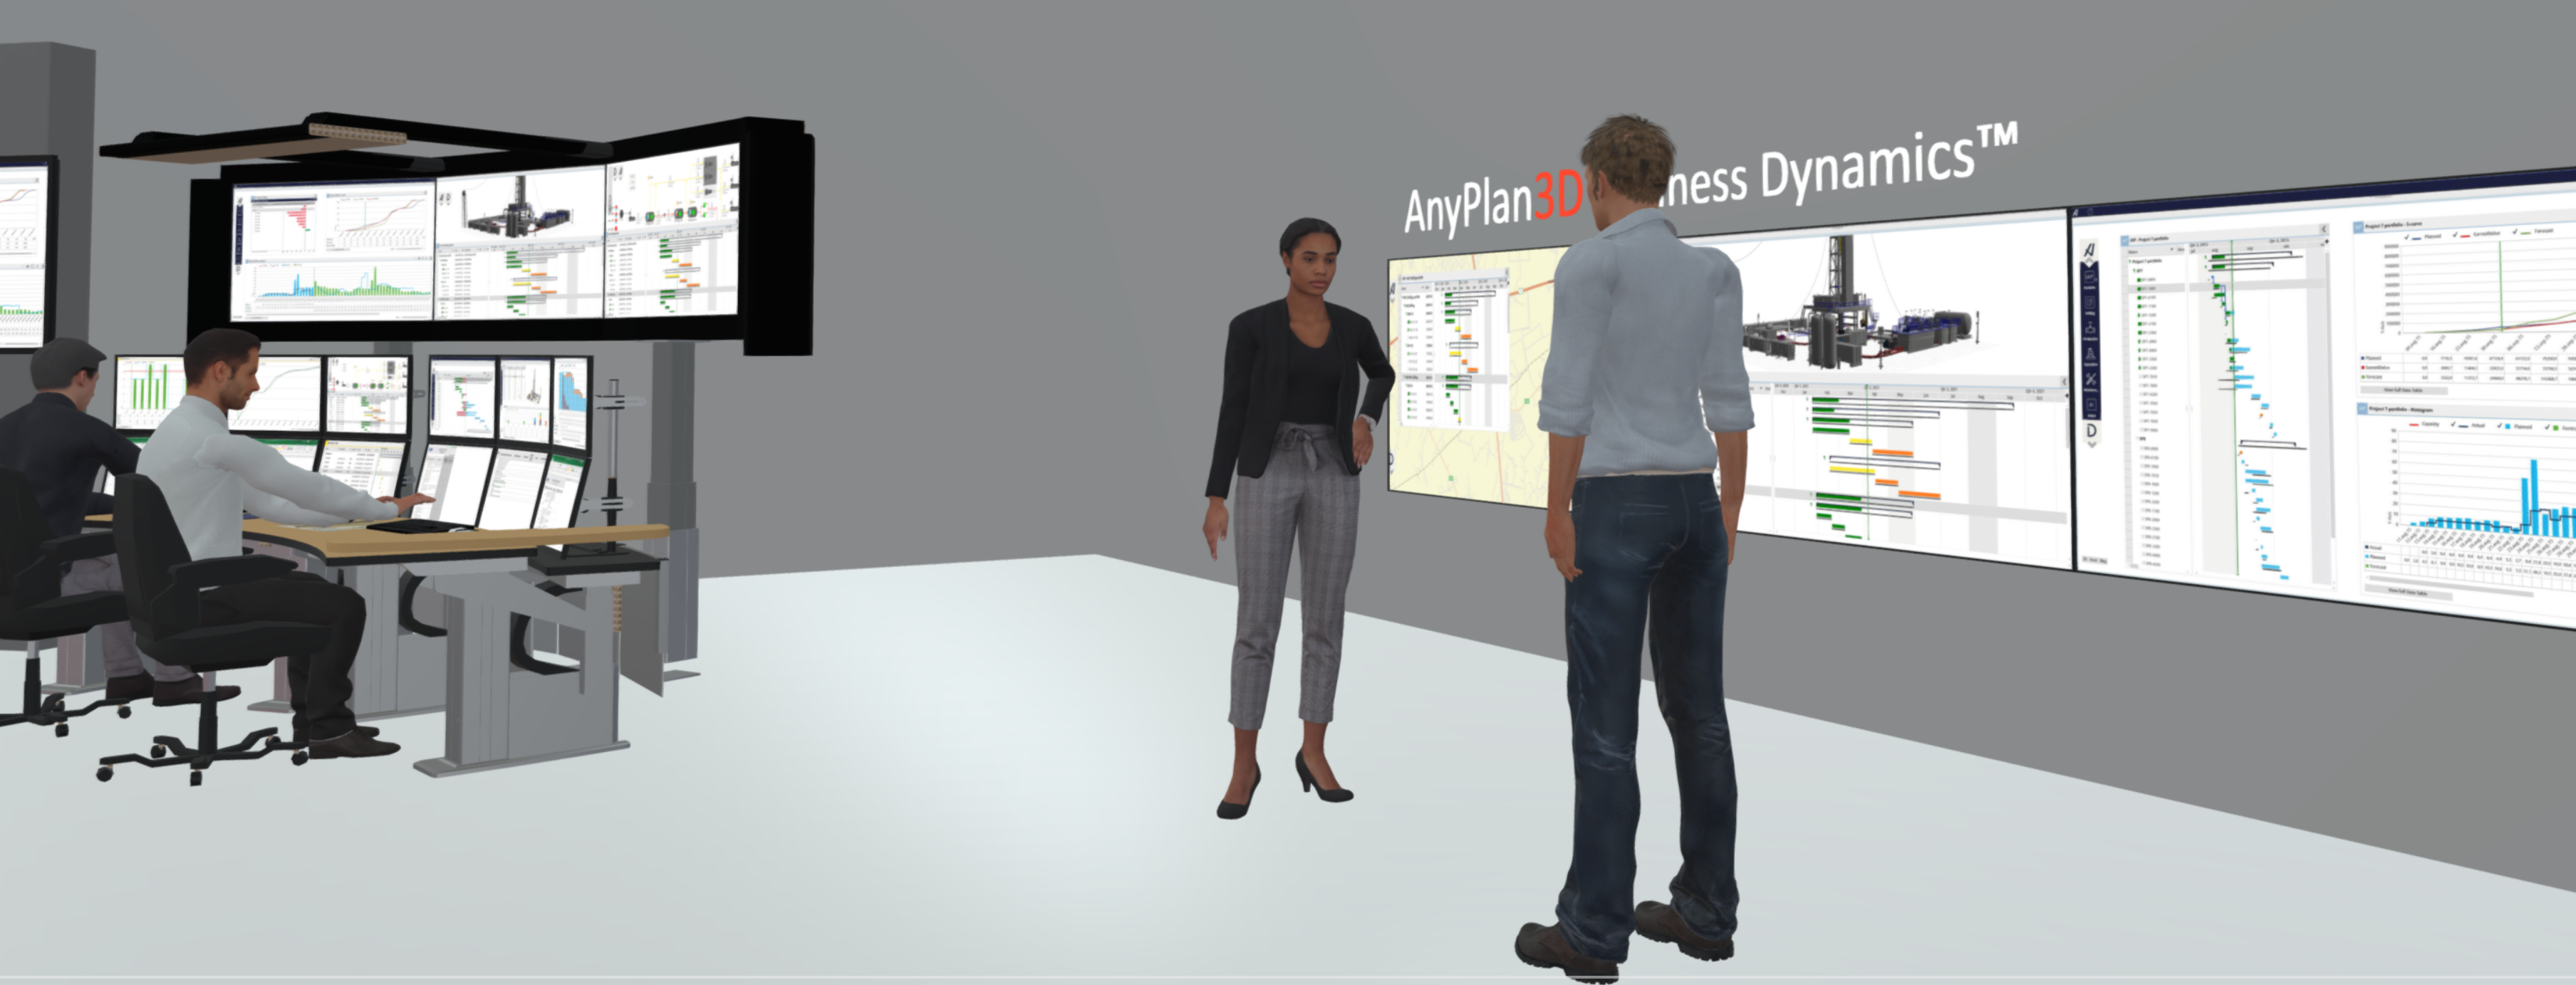 Interview with Roger Berntsen, CEO and co-founder of AnyPlan3D